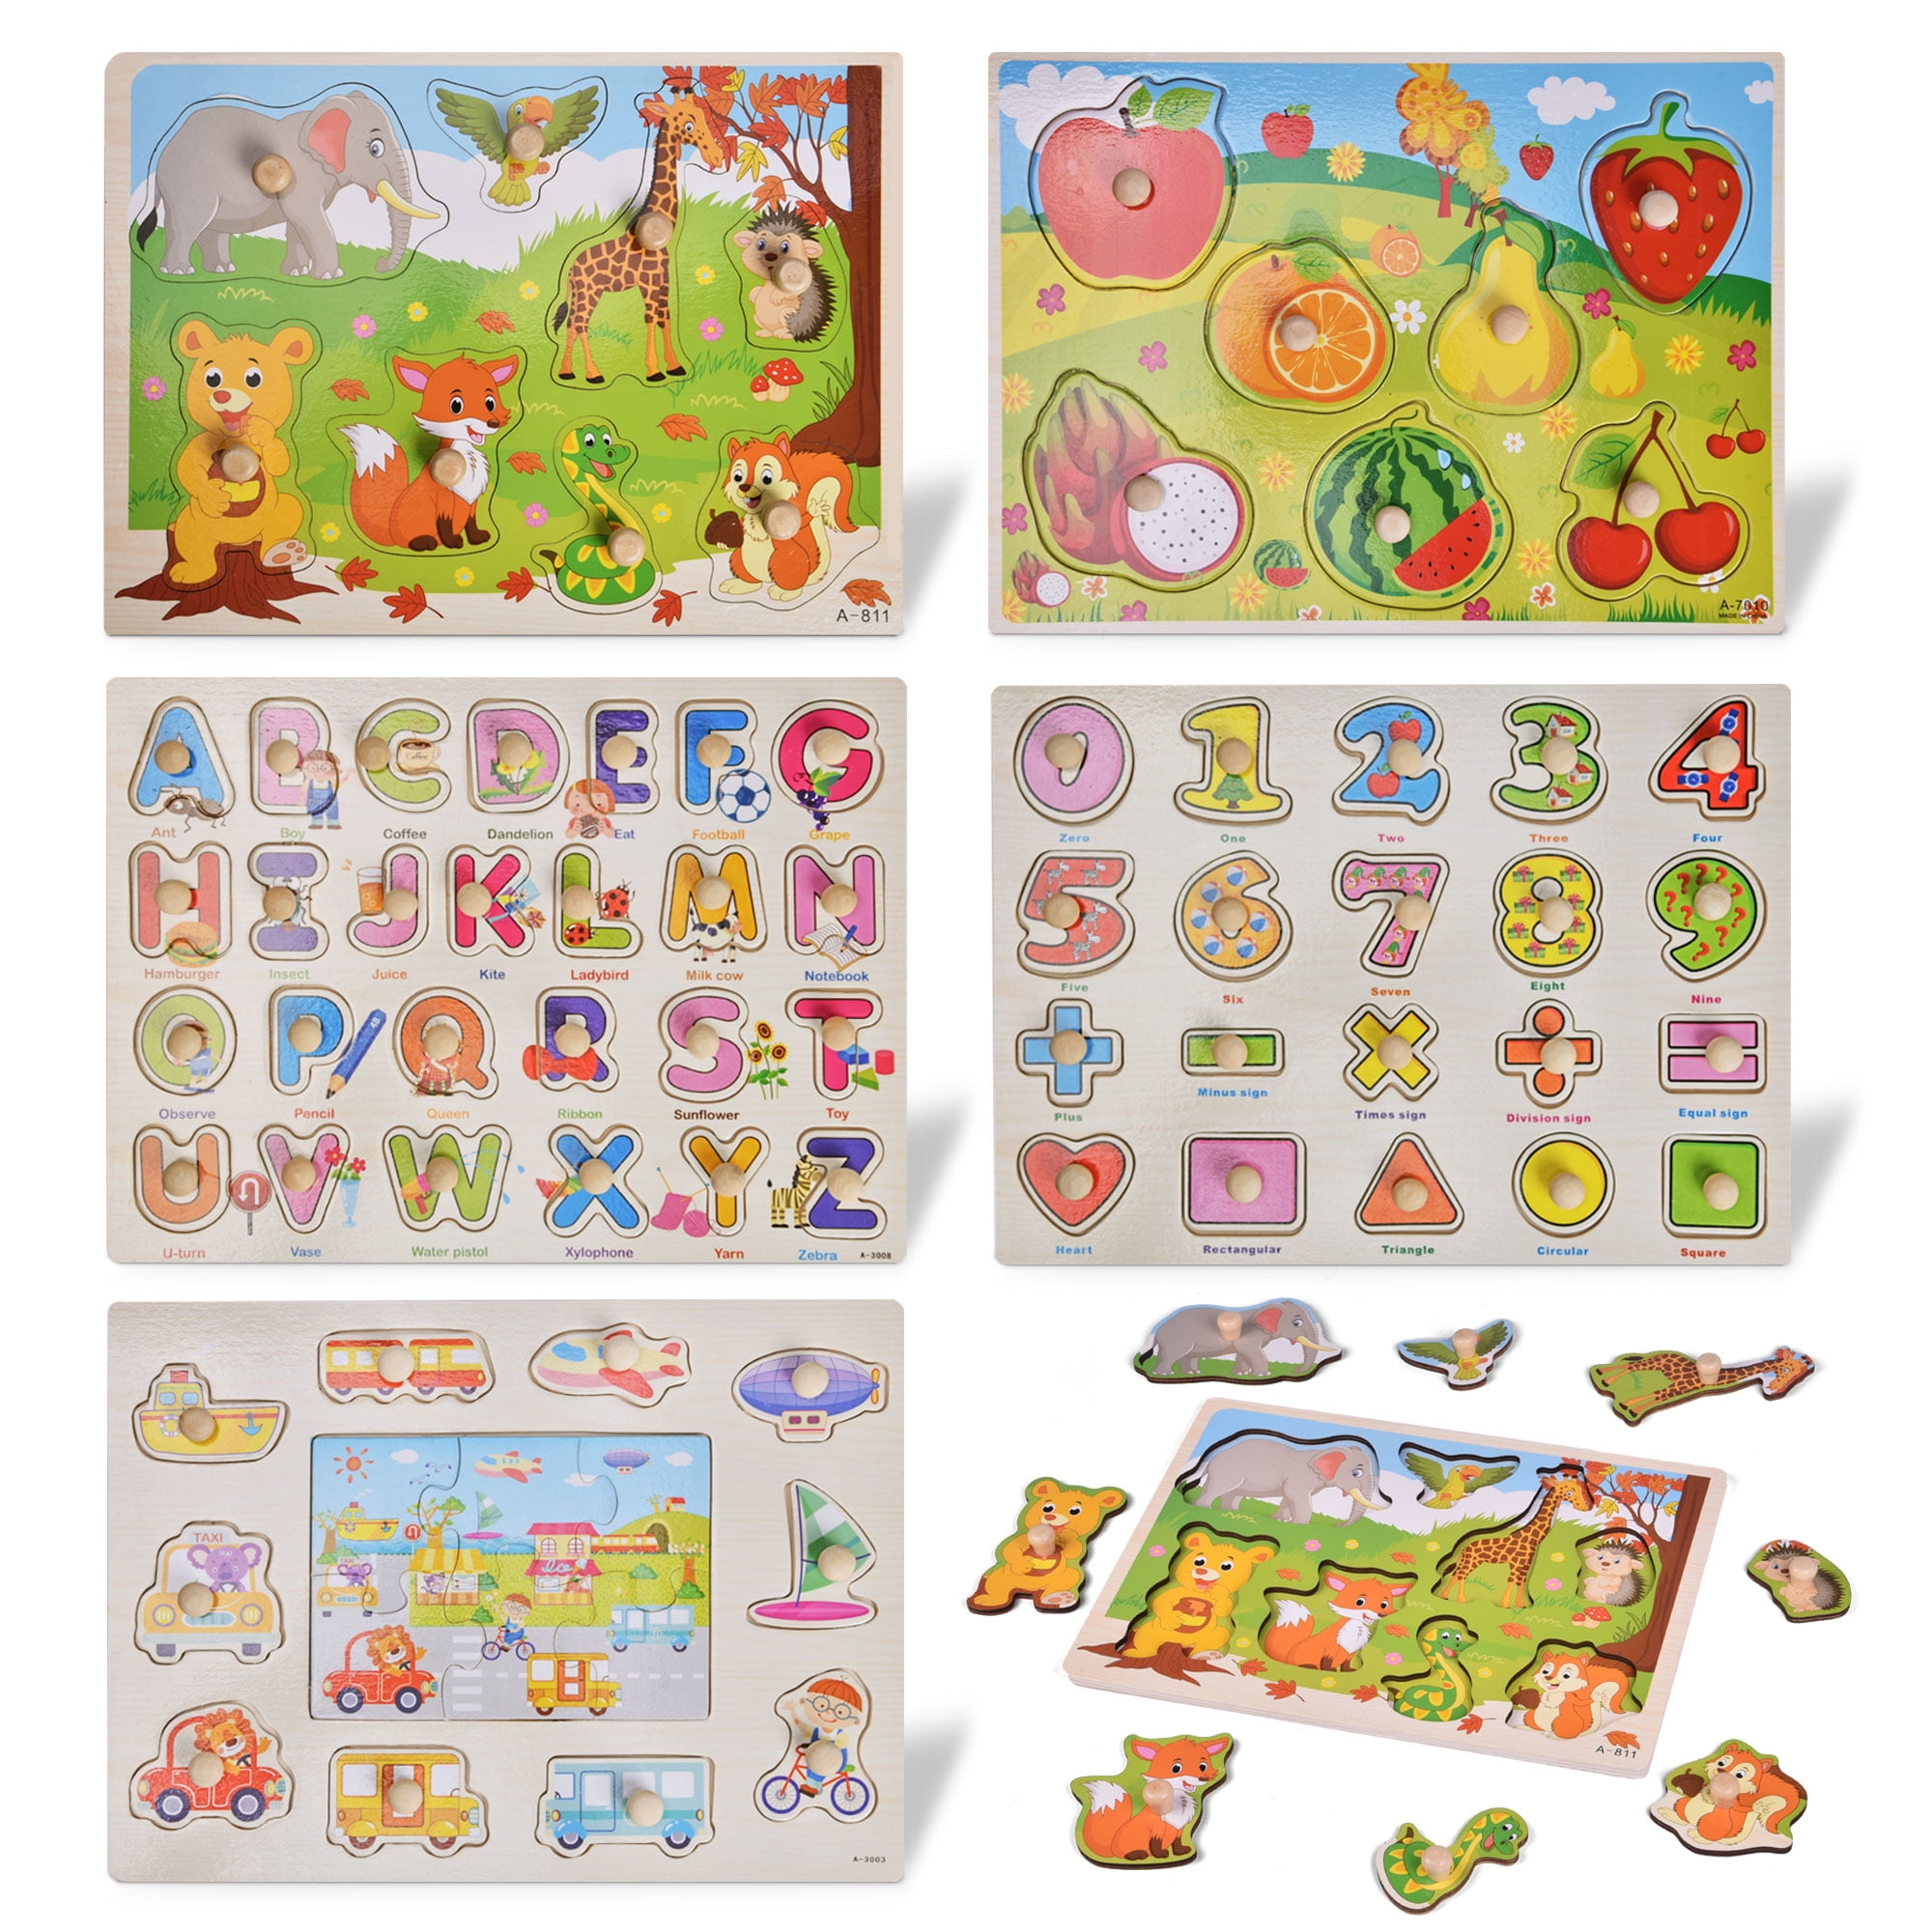 4 Sets Wooden Animals Peg Puzzles Educational Learning Toy for Kids Children 